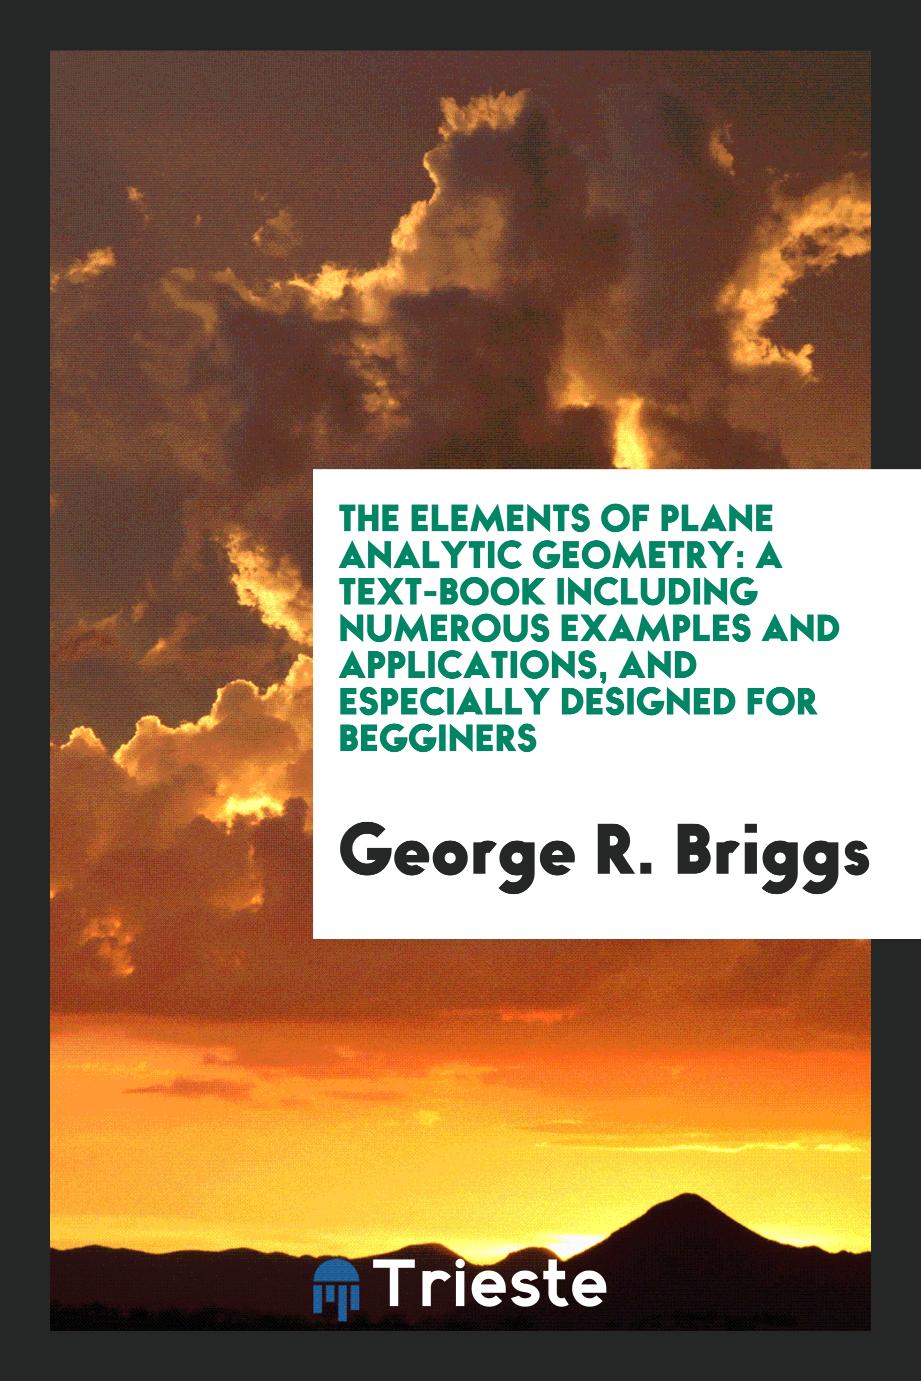 The Elements of Plane Analytic Geometry: A Text-book Including Numerous Examples and Applications, and Especially Designed for Begginers